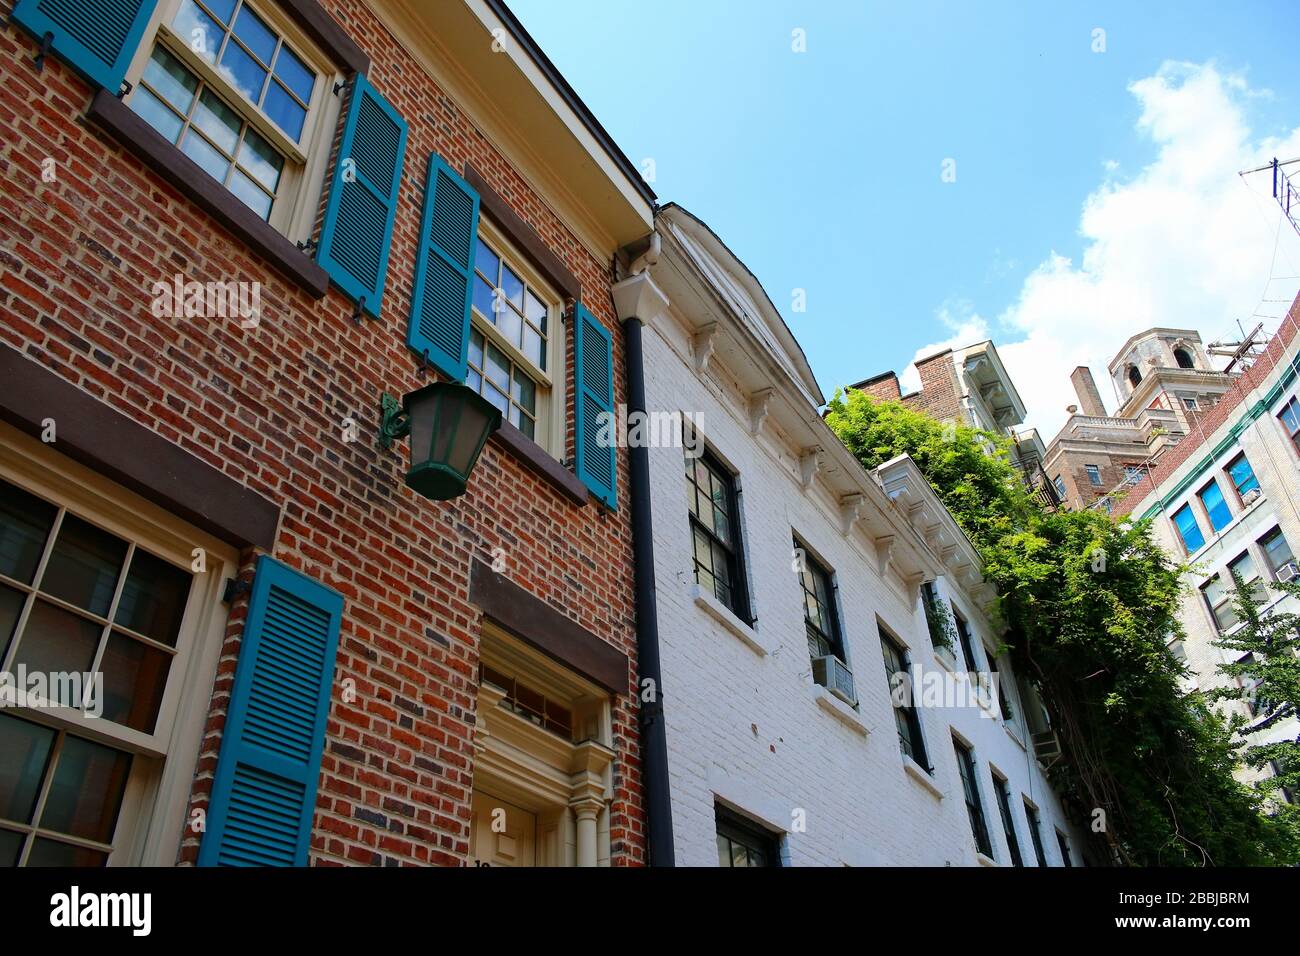 12 Gay Street is a former residence of depression-era Mayor of NYC Jimmy Walker, who ran a speakeasy there called Pirate's Den. Now, allegedly, it bel Stock Photo